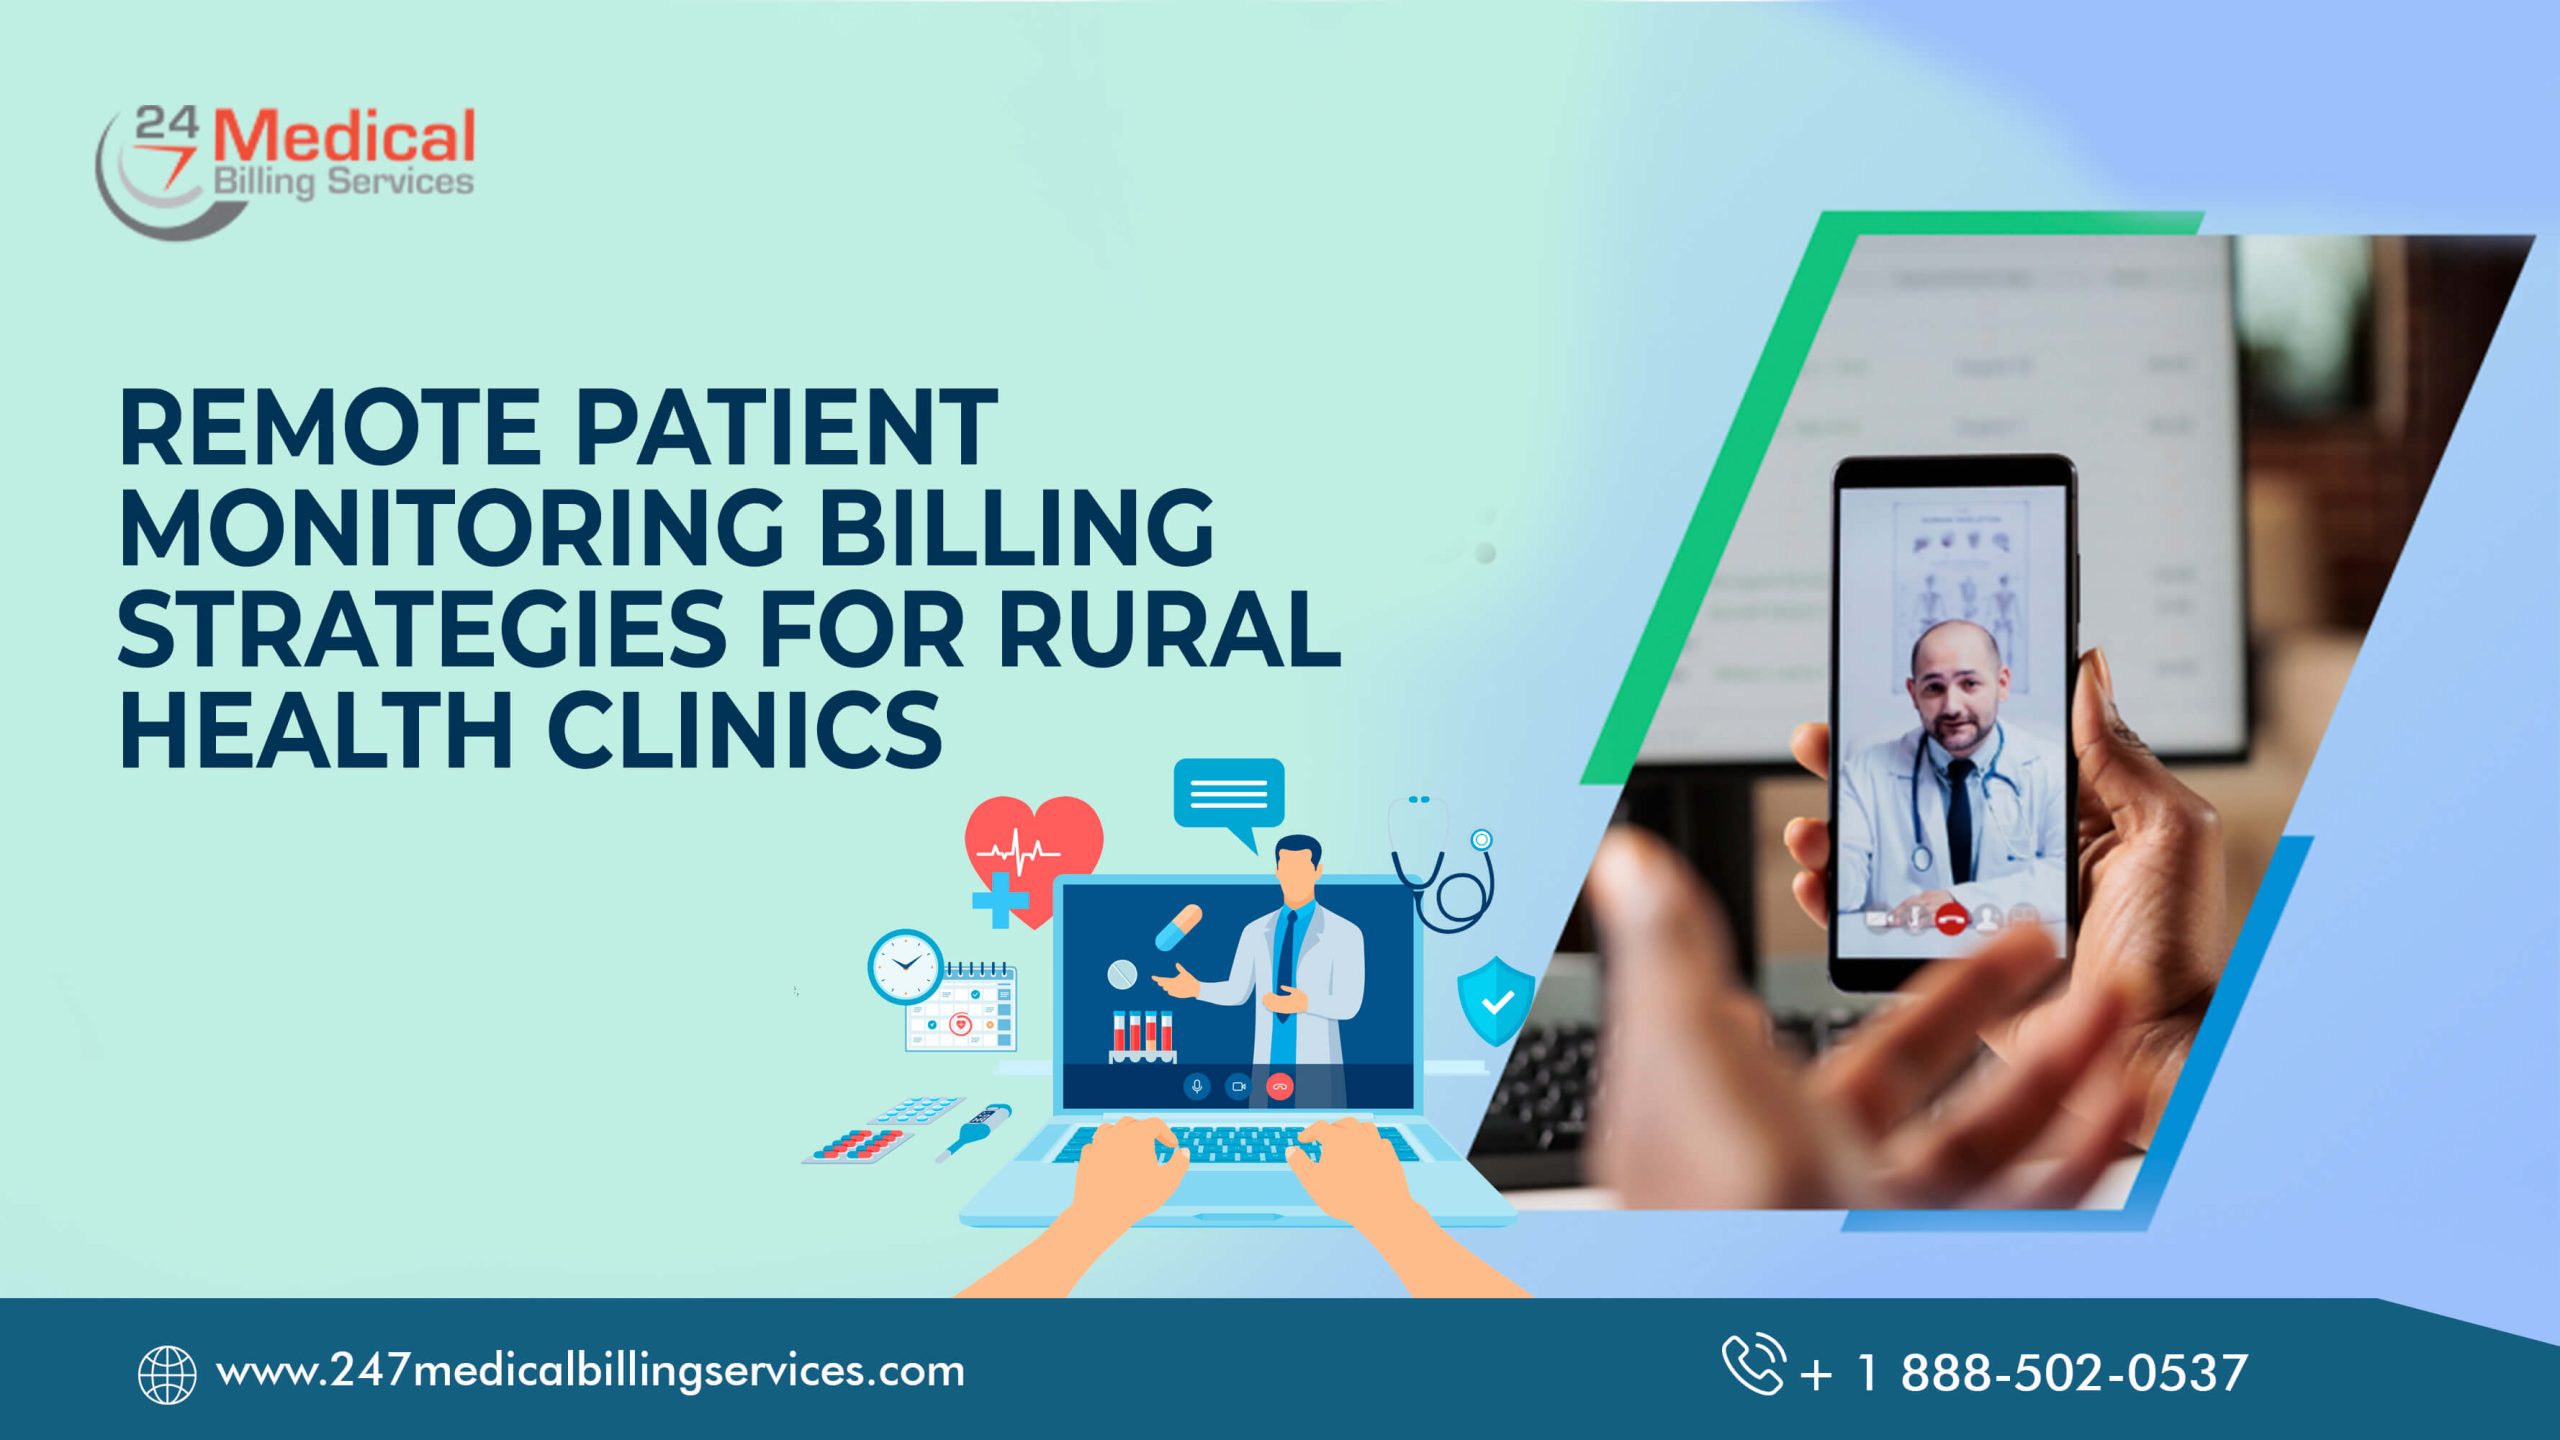 Remote Patient Monitoring Billing Strategies for Rural Health Clinics - 24/7 Medical Billing Services